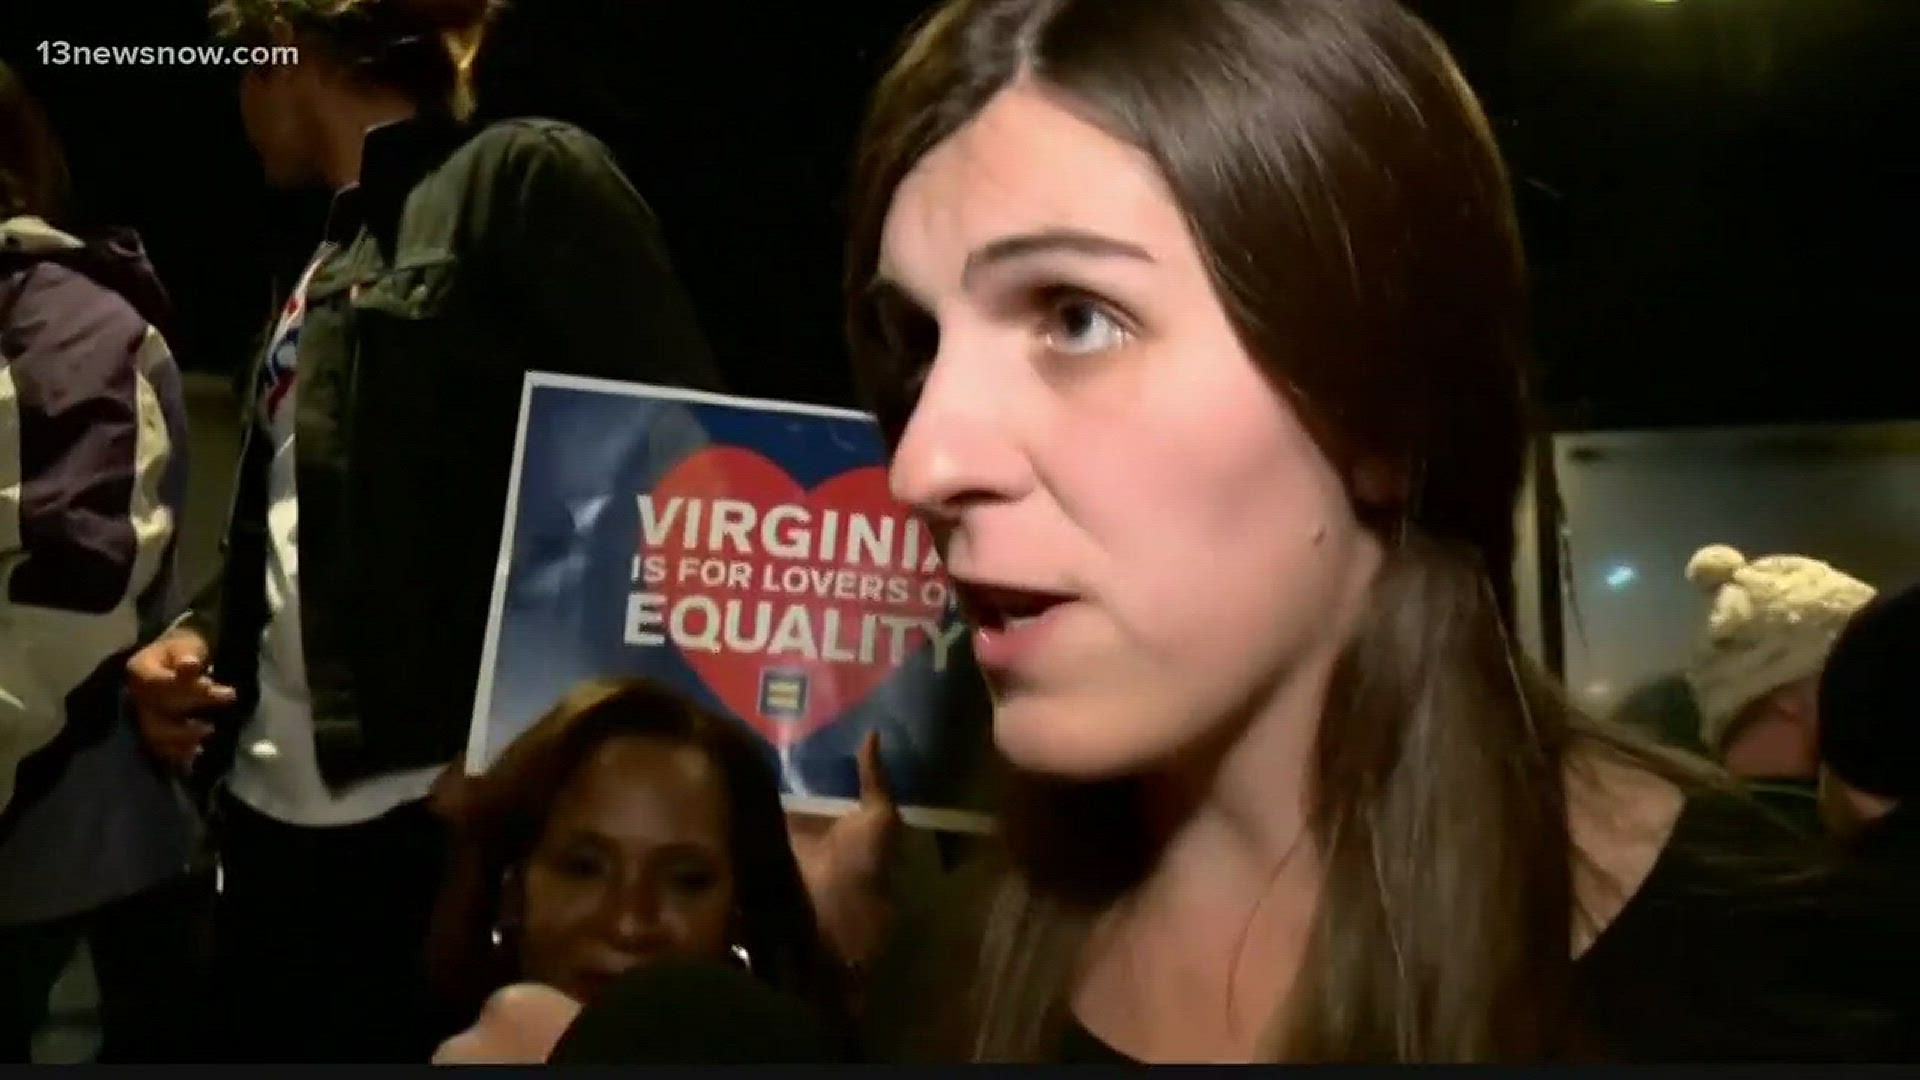 Danica Roem will make history as the first openly transgender person elected and seated in a state legislature.